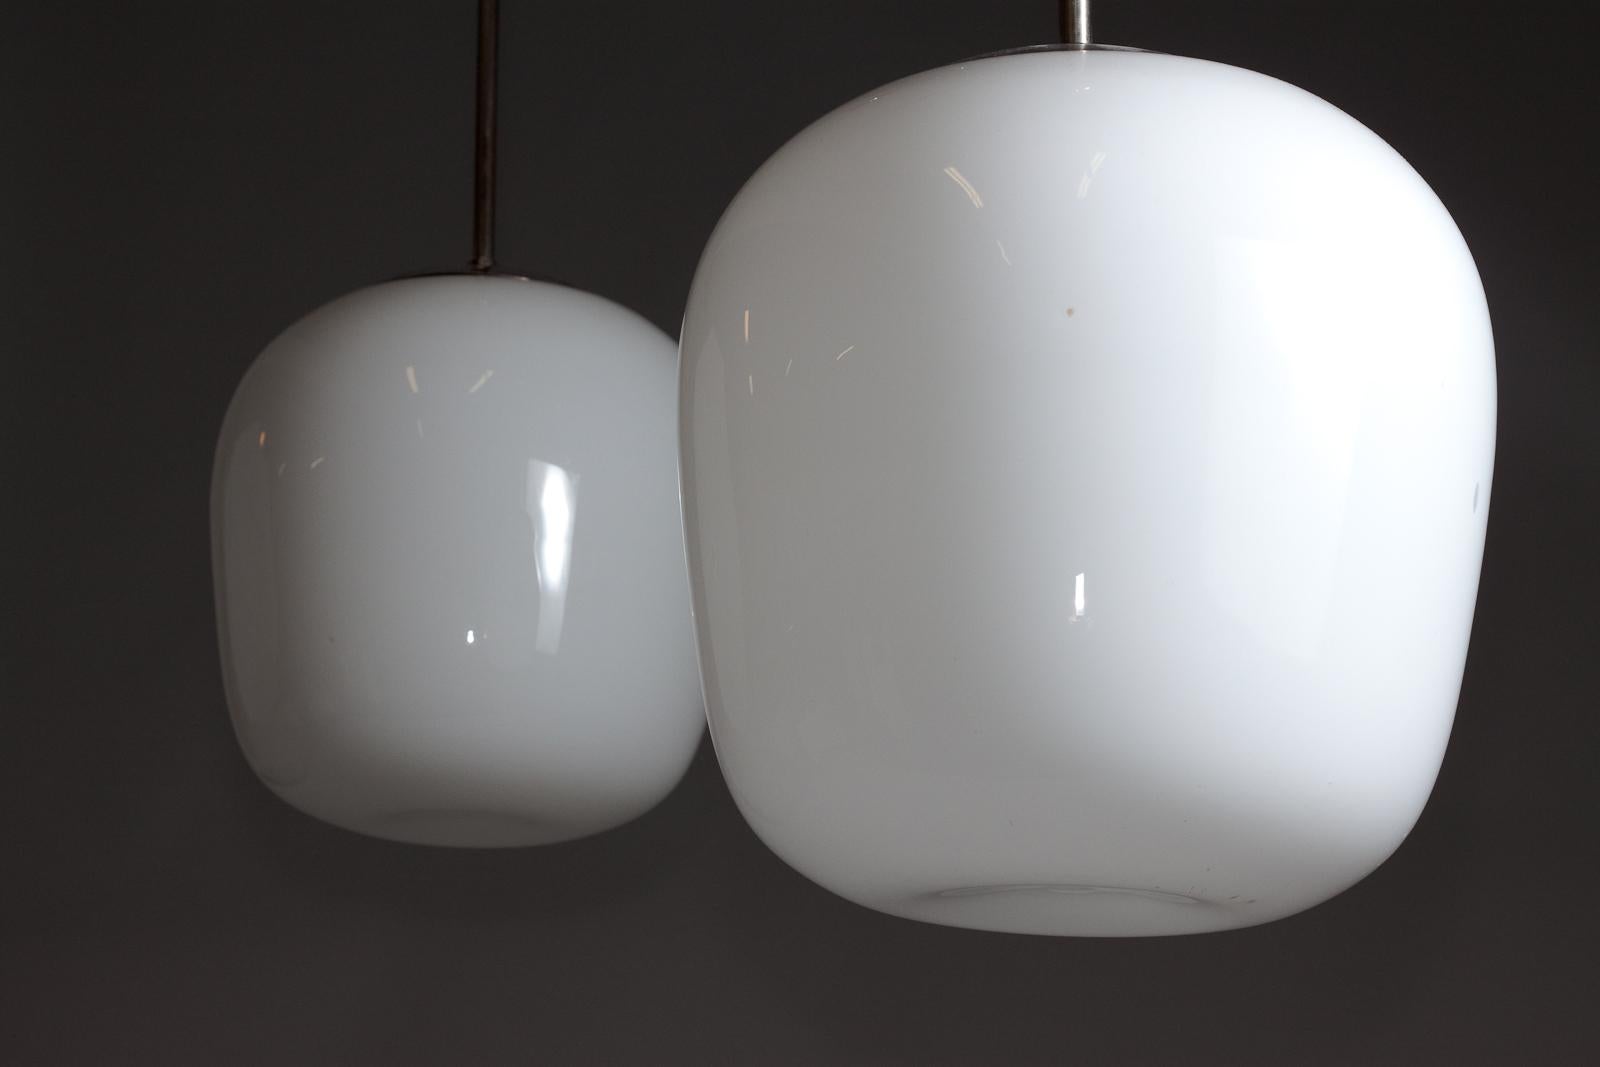 Introducing the exquisite Gunnel Nyman pair of 1940s opaline glass pendant lamps, crafted for Idman Oy. These vintage pendant lamps feature a visually stunning opaline glass diffuser, providing a soft, warm glow that enhances any interior space. The